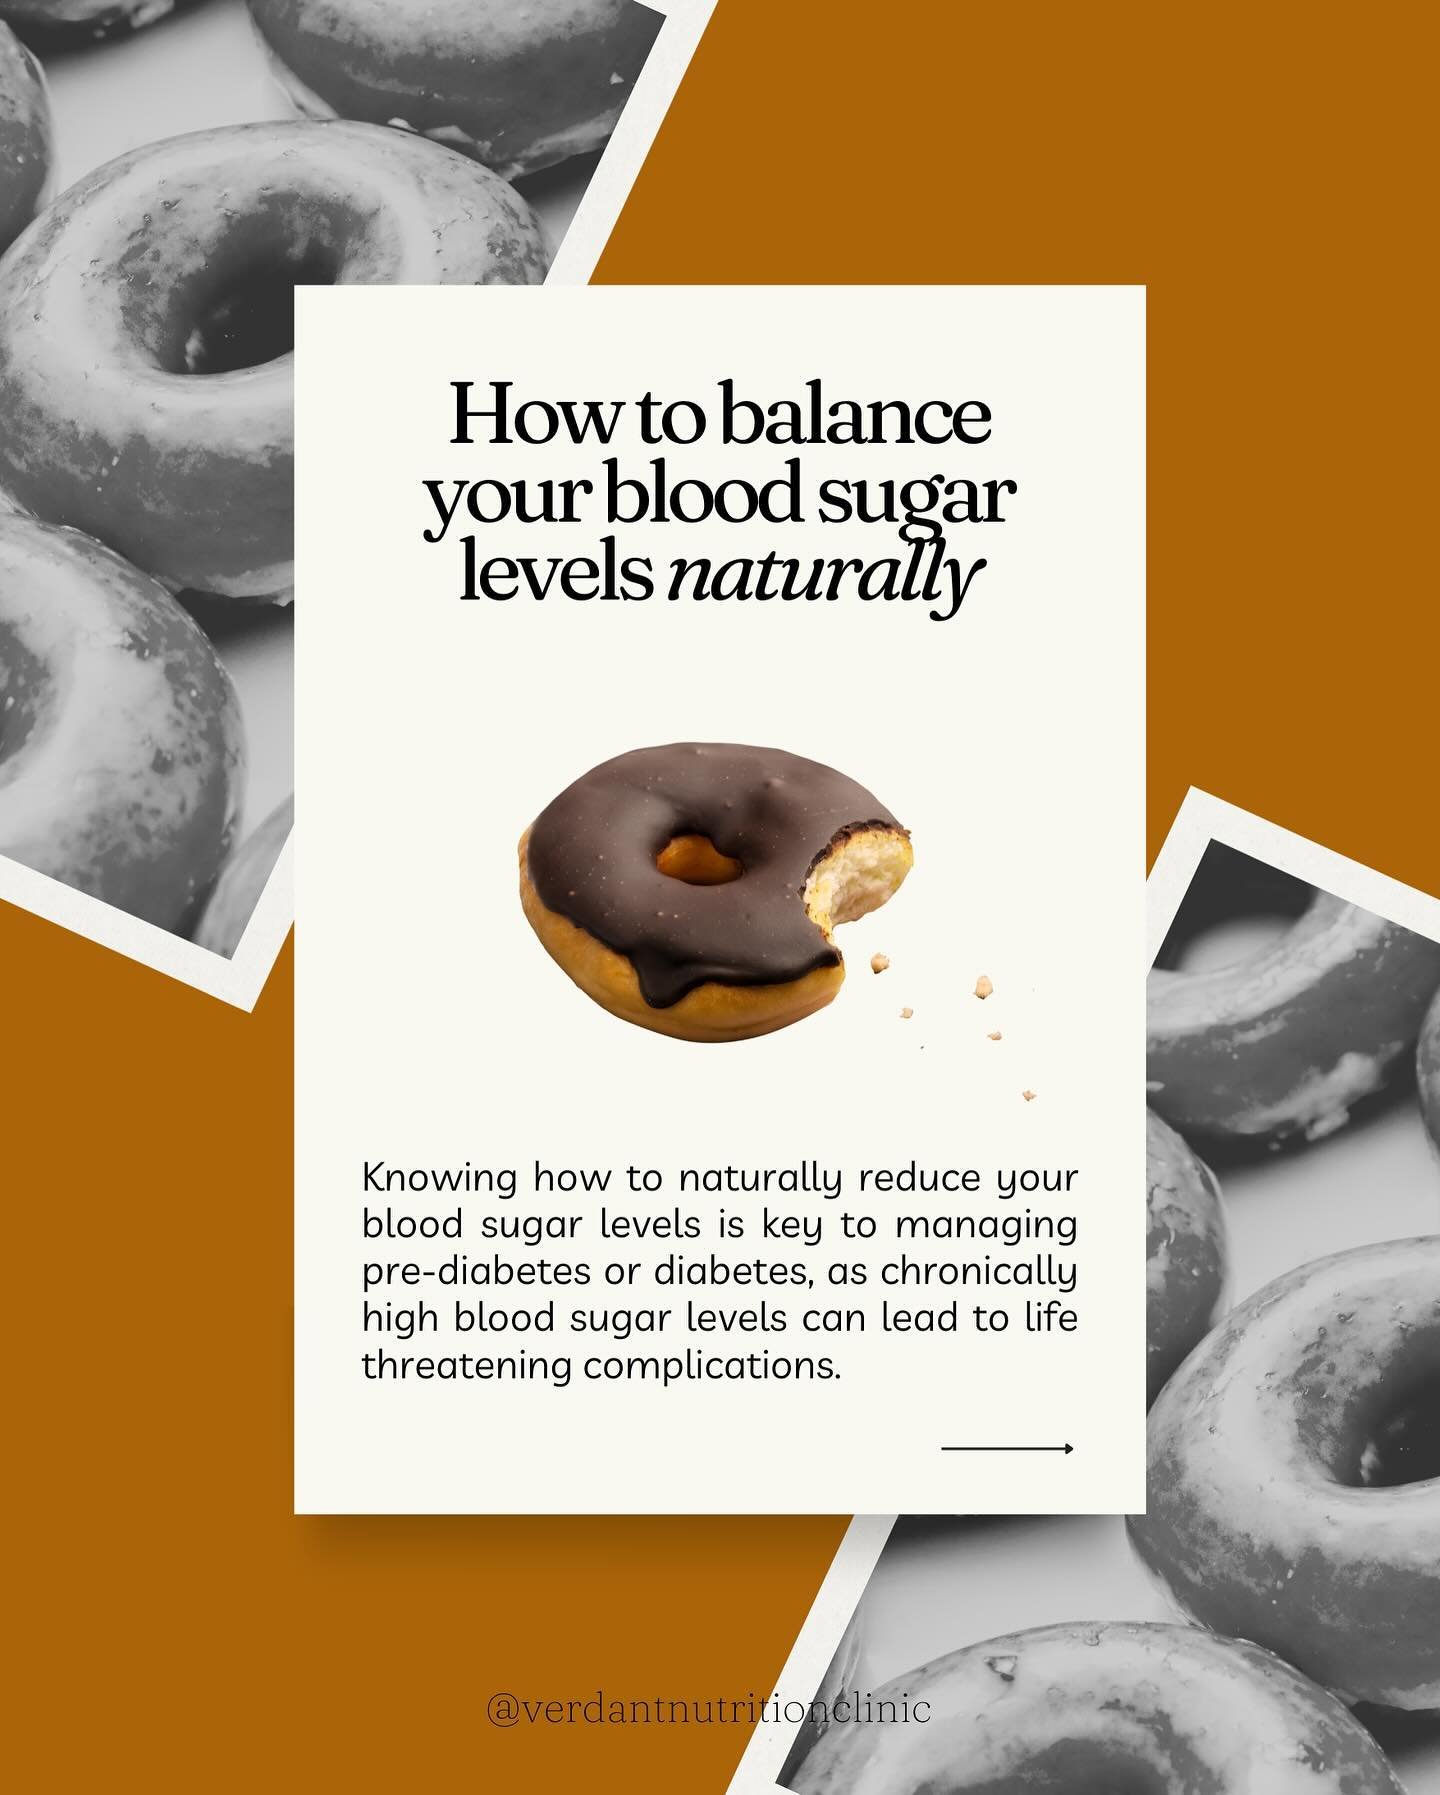 Mastering the art of blood sugar balance: simple tips to keep your levels in check! 💪🏼 🍏 

#healthyliving #bloodsugarbalance #nutritiontips #wholefoodplantbased #wholefoodnutrition #verdantnutritionclinic #sowtheseedsofhealth